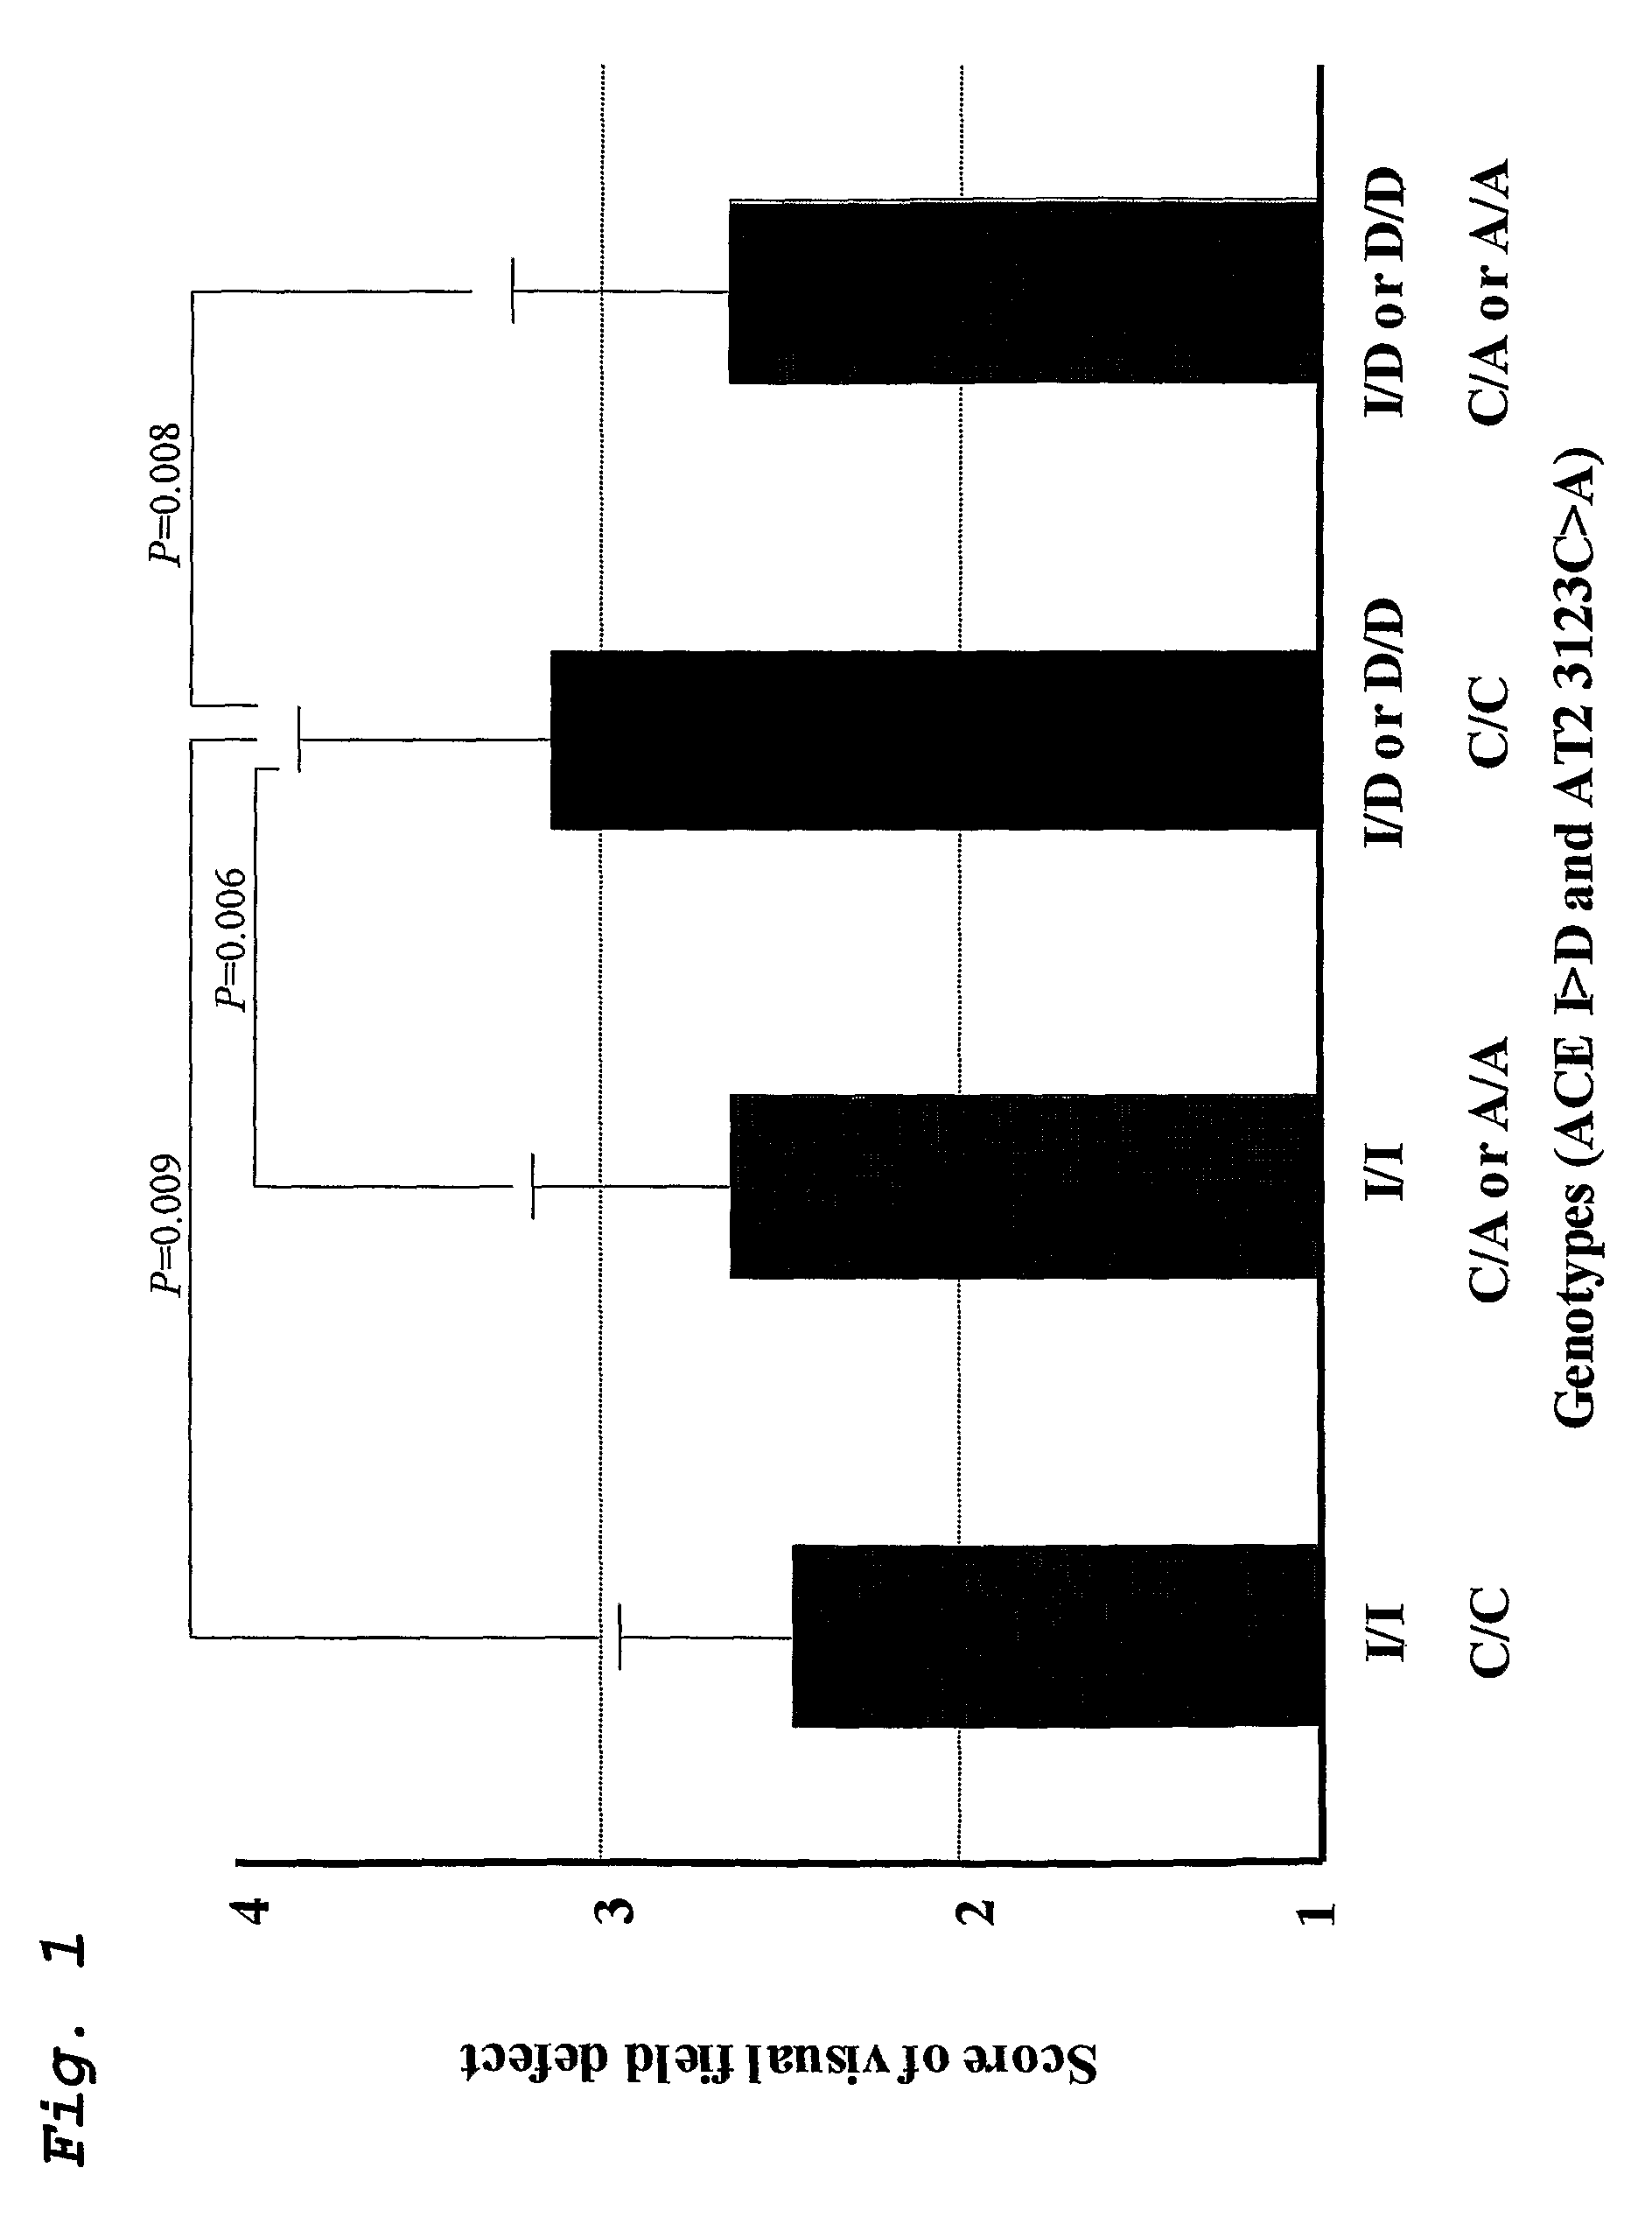 Method for diagnosing or predicting susceptibility to optic neuropathy